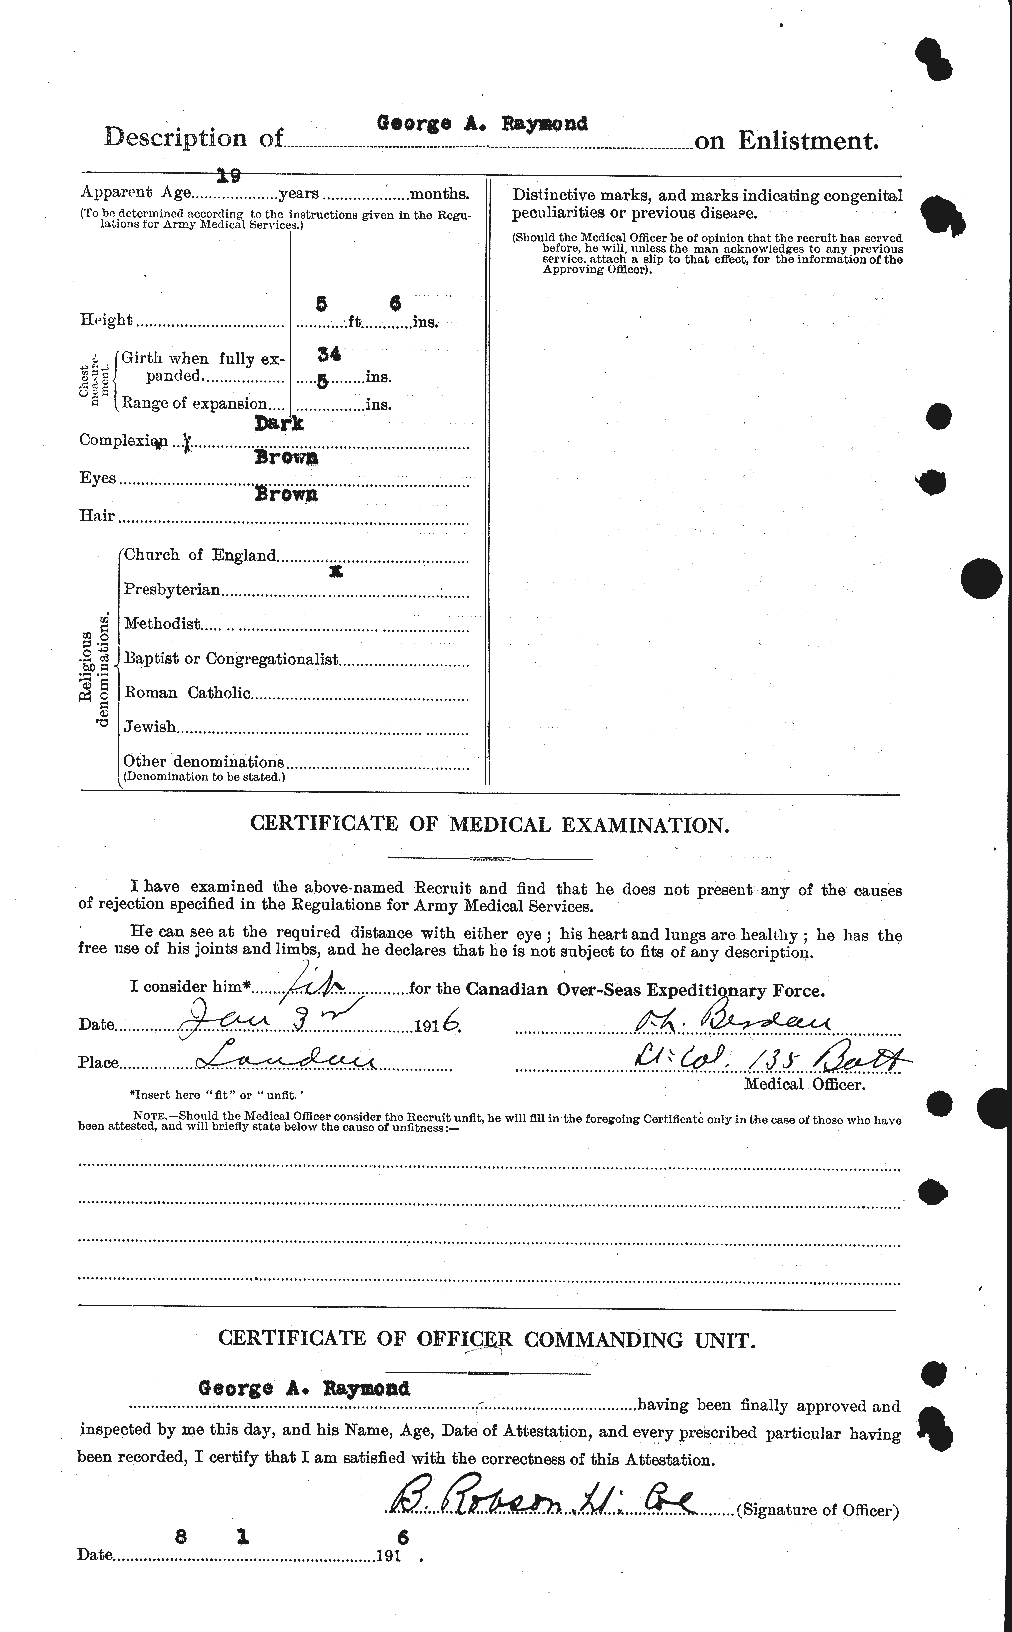 Personnel Records of the First World War - CEF 595341b